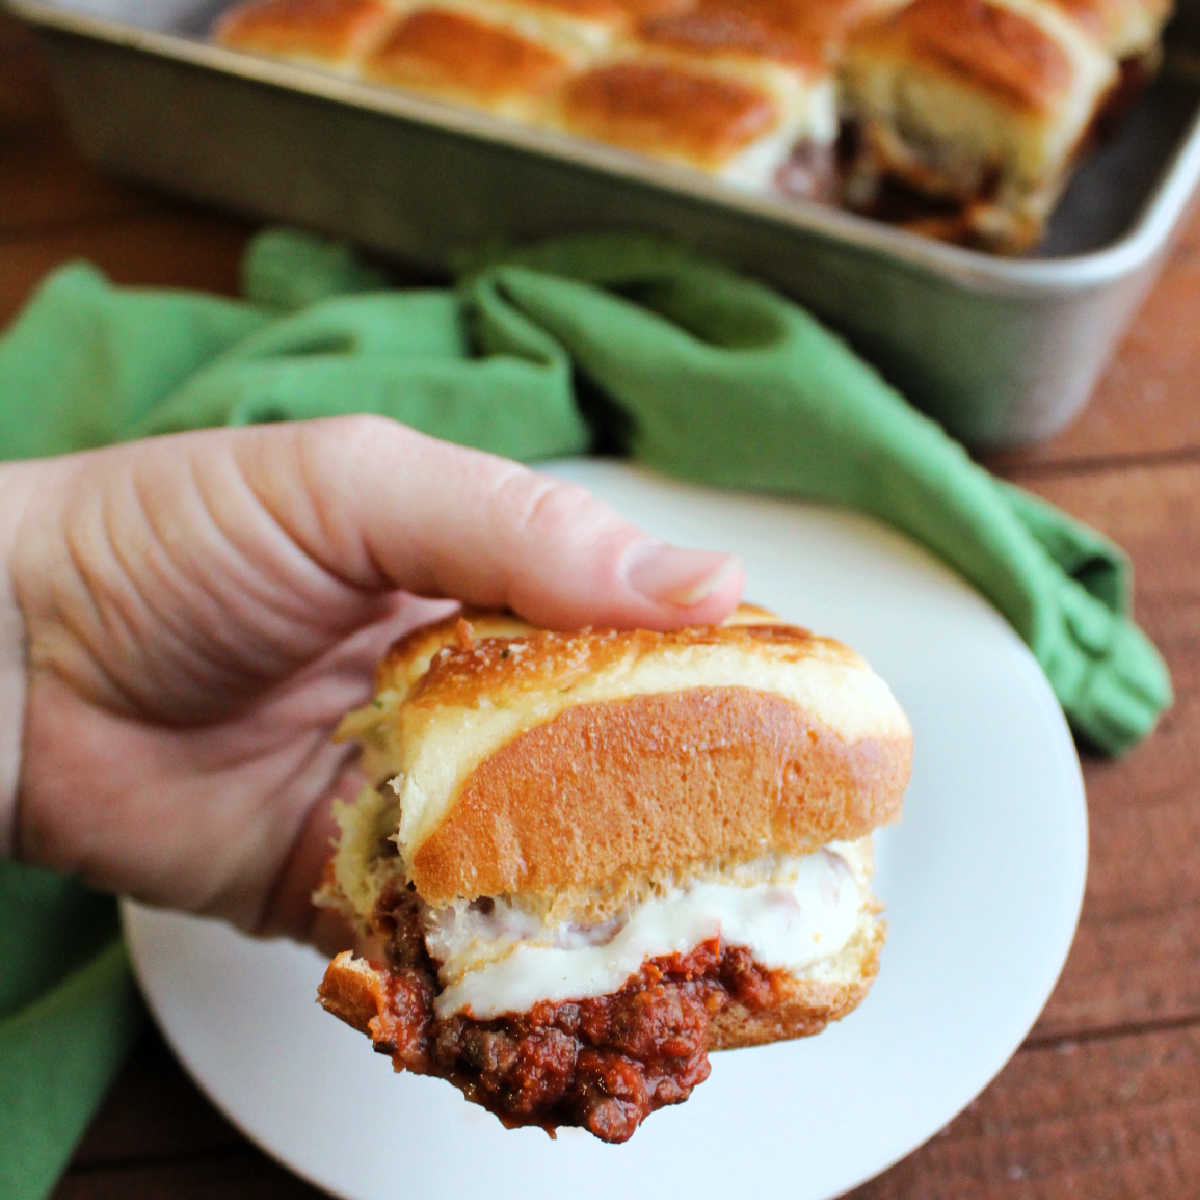 Hand holding pizza burger slider with melty cheese and garlic butter coated bun.